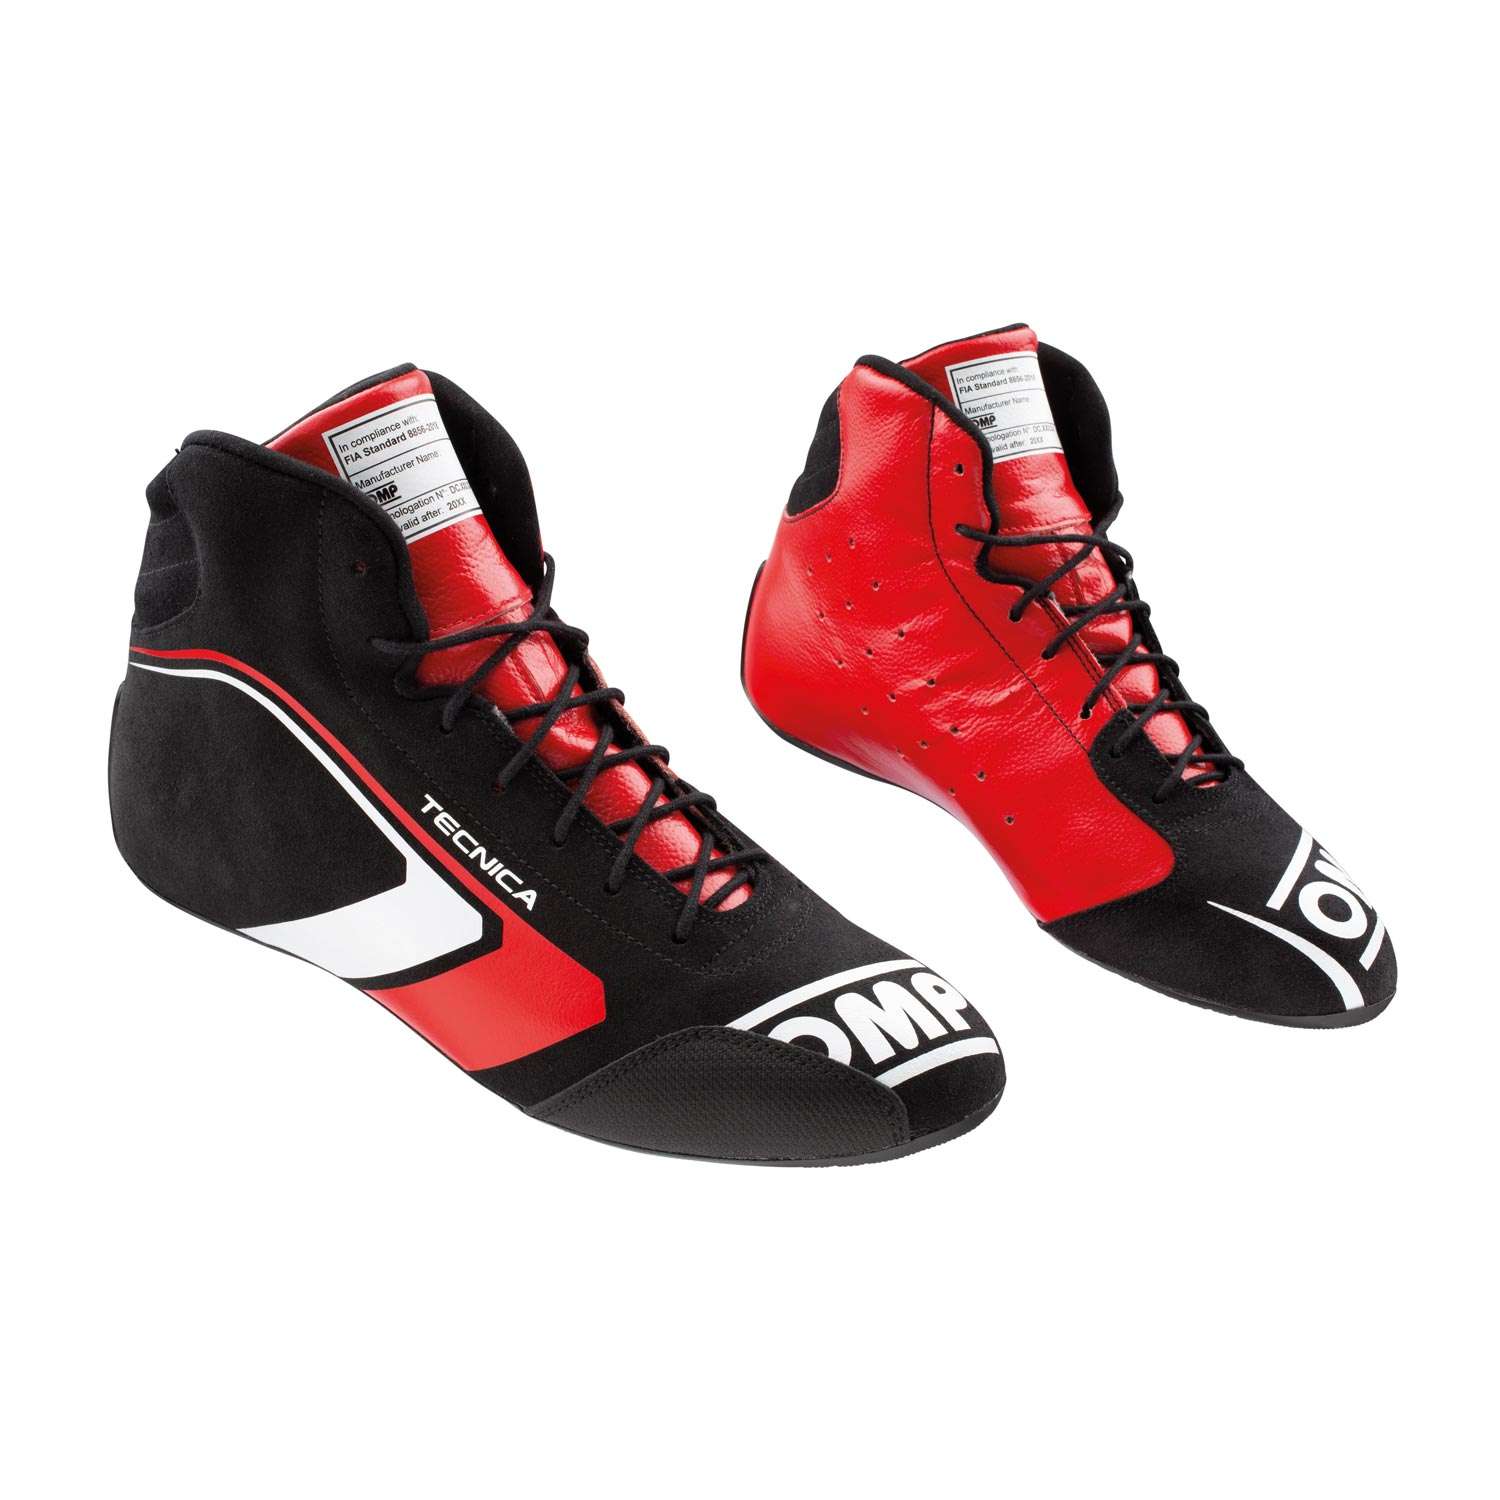 OMP Italy TECNICA MY21 Racing Shoes Black/Red (FIA ) Red || Black ...